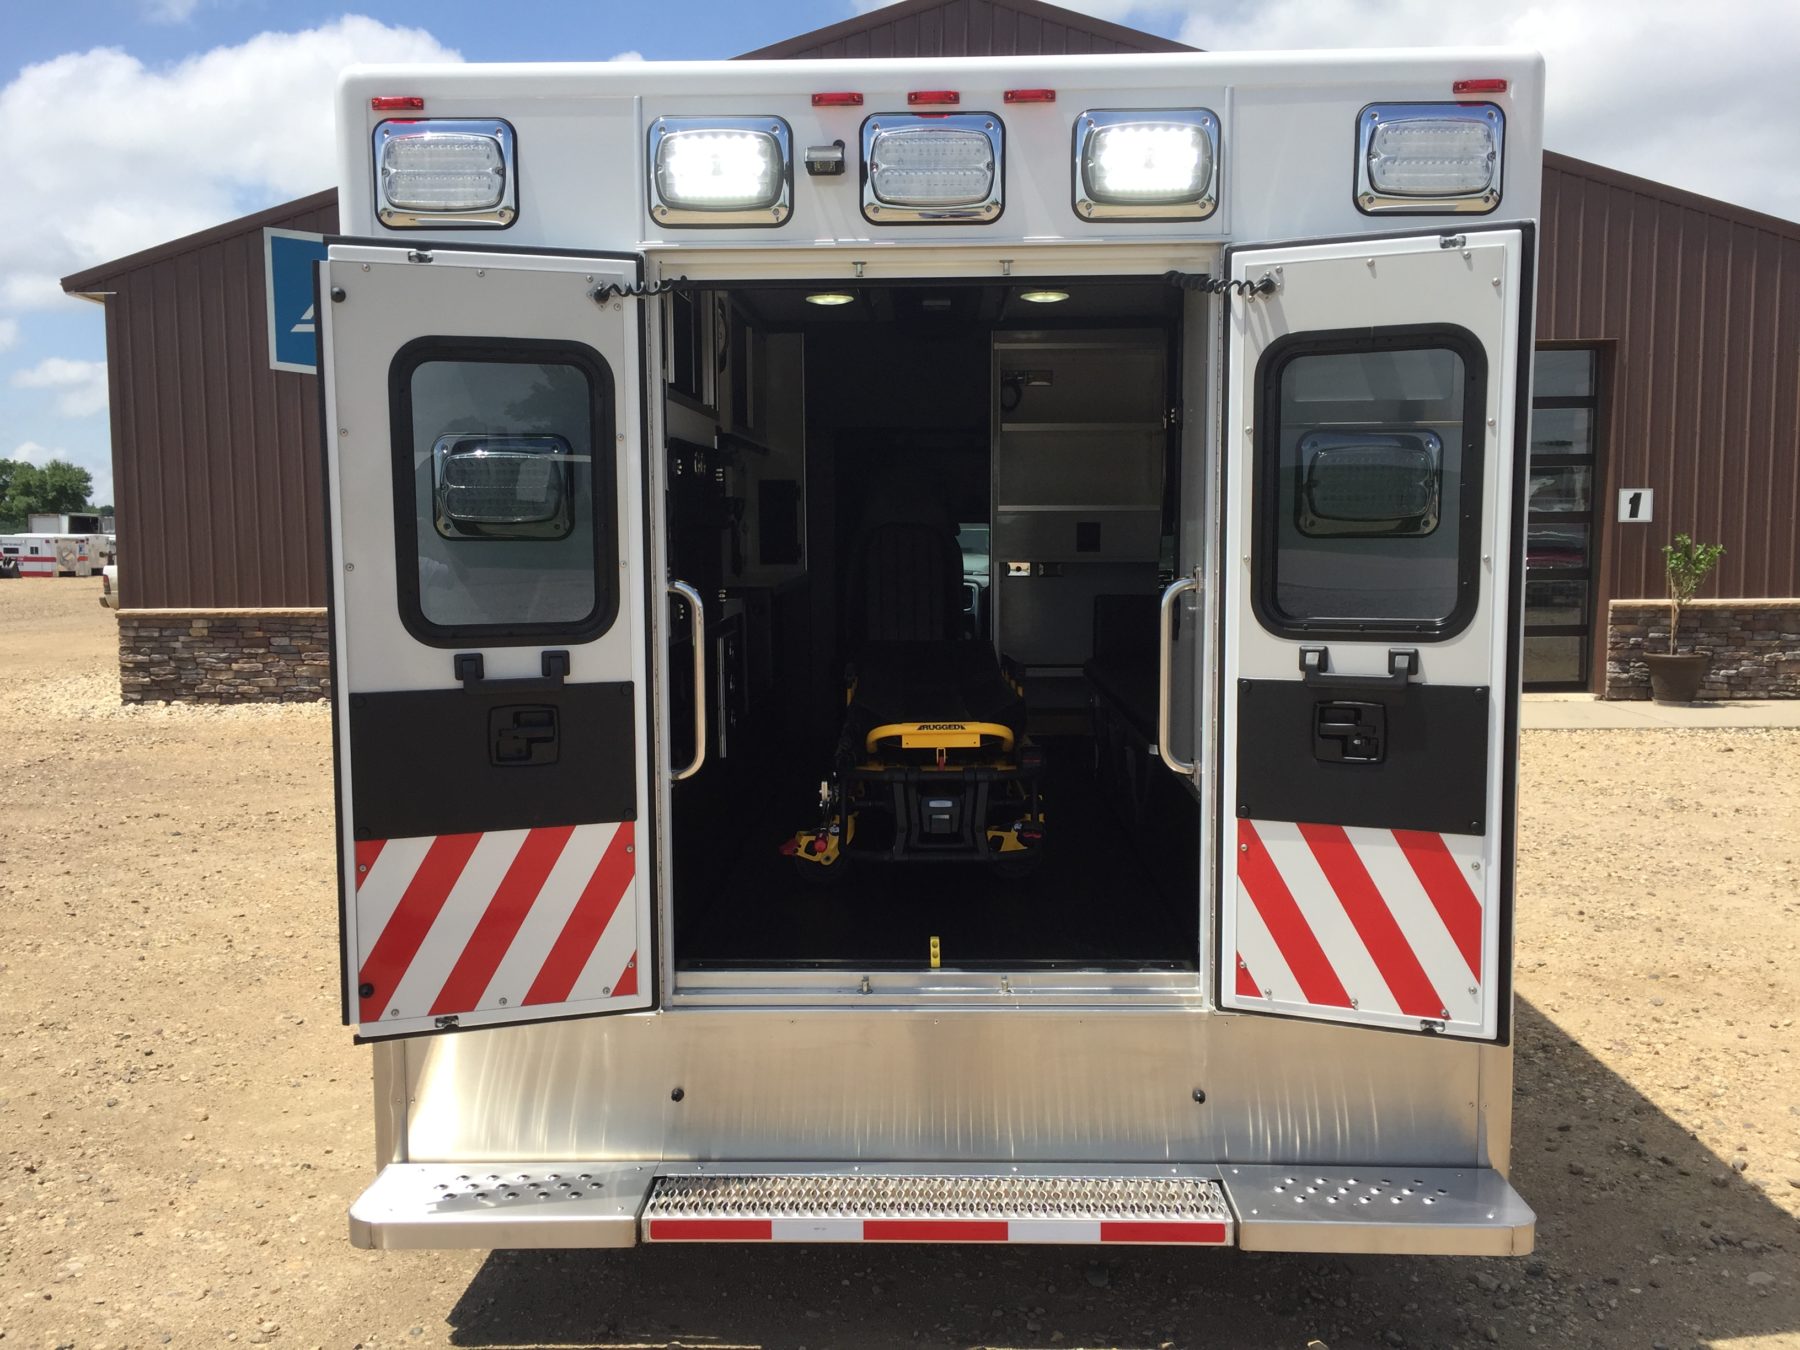 2017 Ram 4500 4x4 Heavy Duty Ambulance For Sale – Picture 9